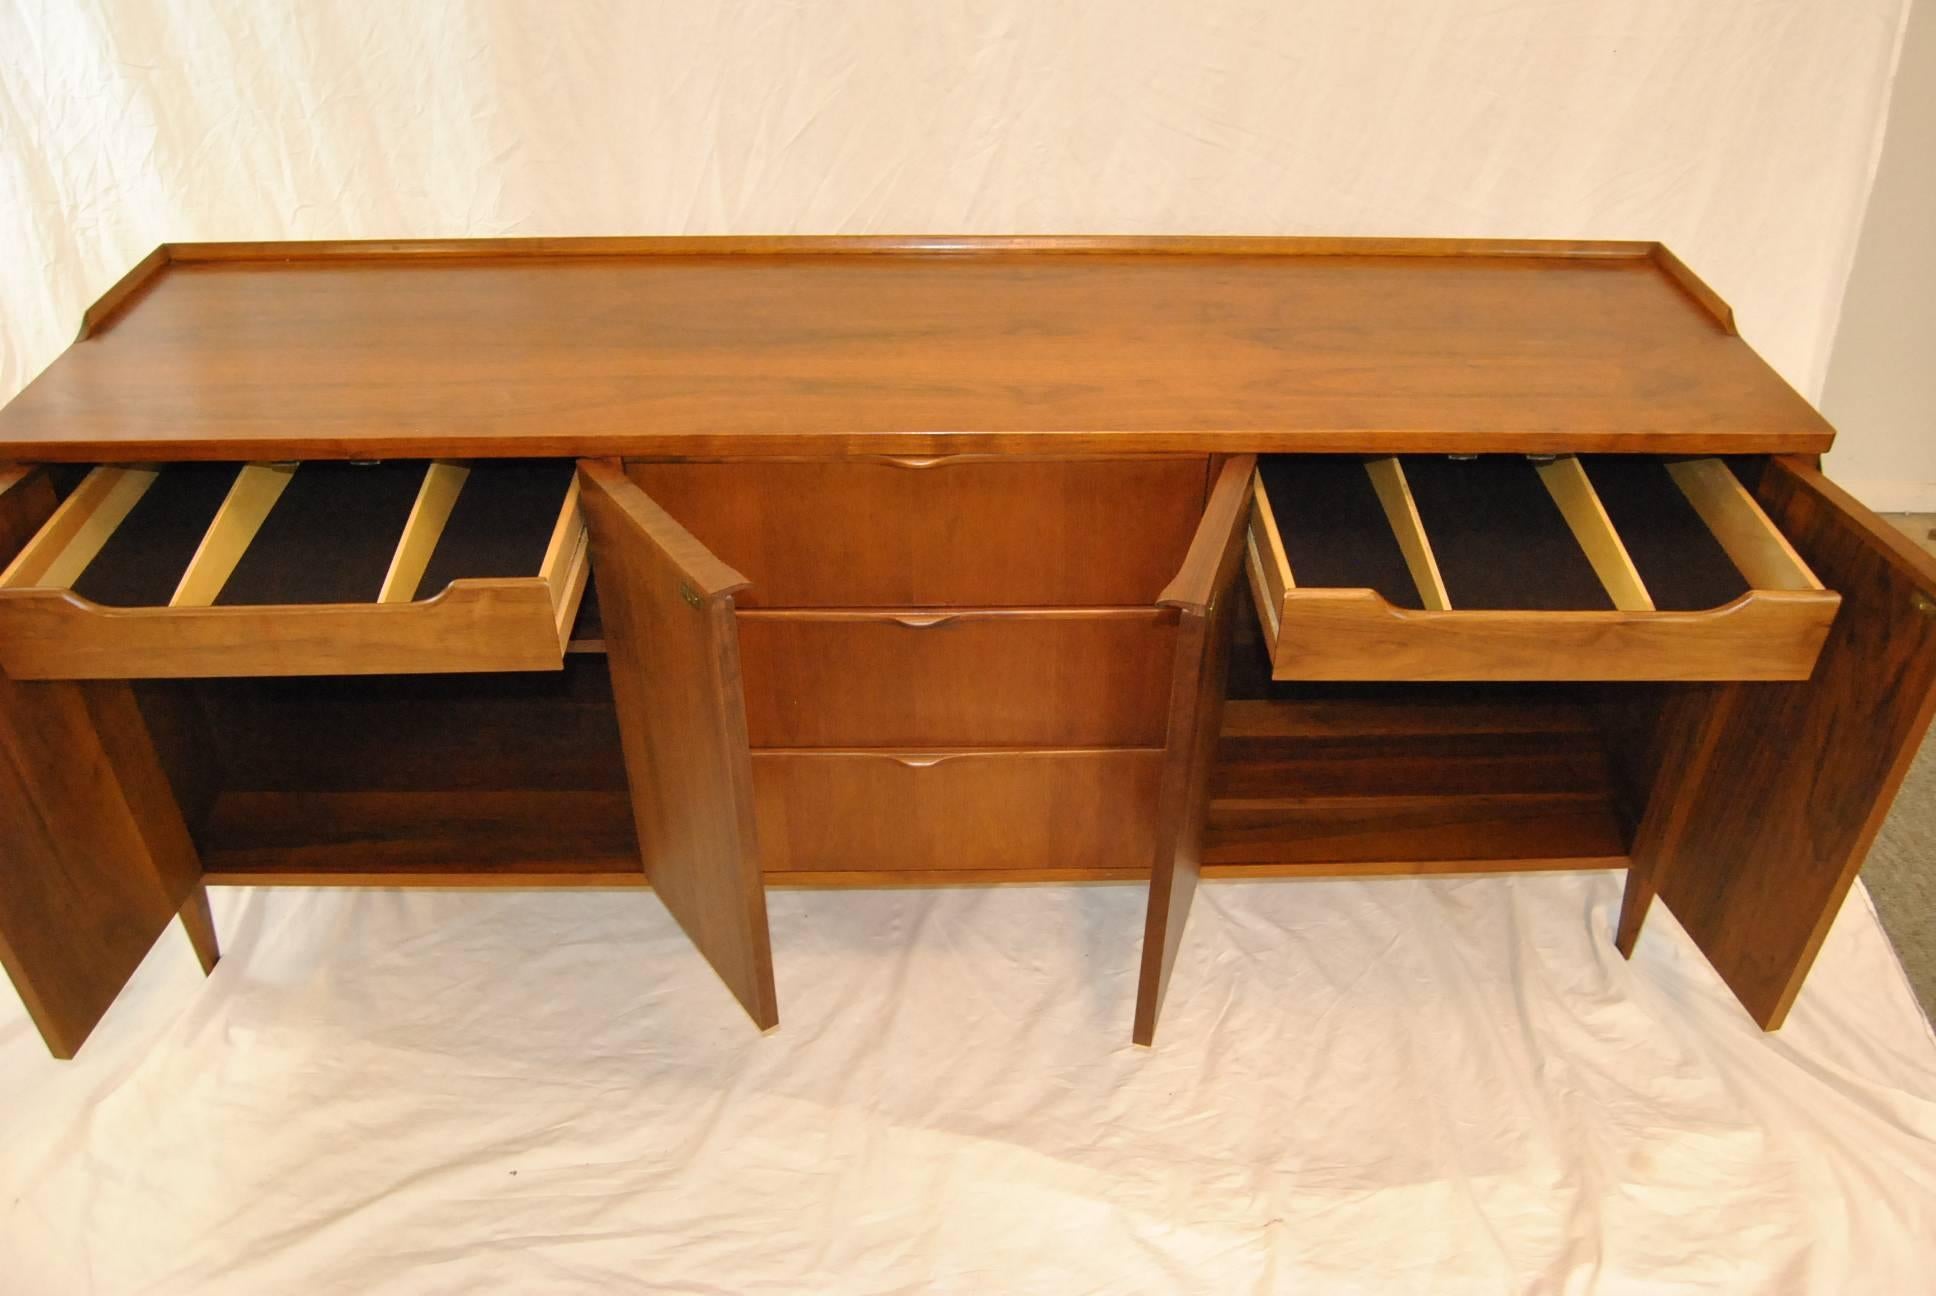 A beautiful Mid-Century Modern credenza by Foster-McDavid. Credenza features a right and left two-door storage area which bracket three dovetailed drawers. The walnut in this piece has beautiful graining which gives it a rosewood like appearance. In